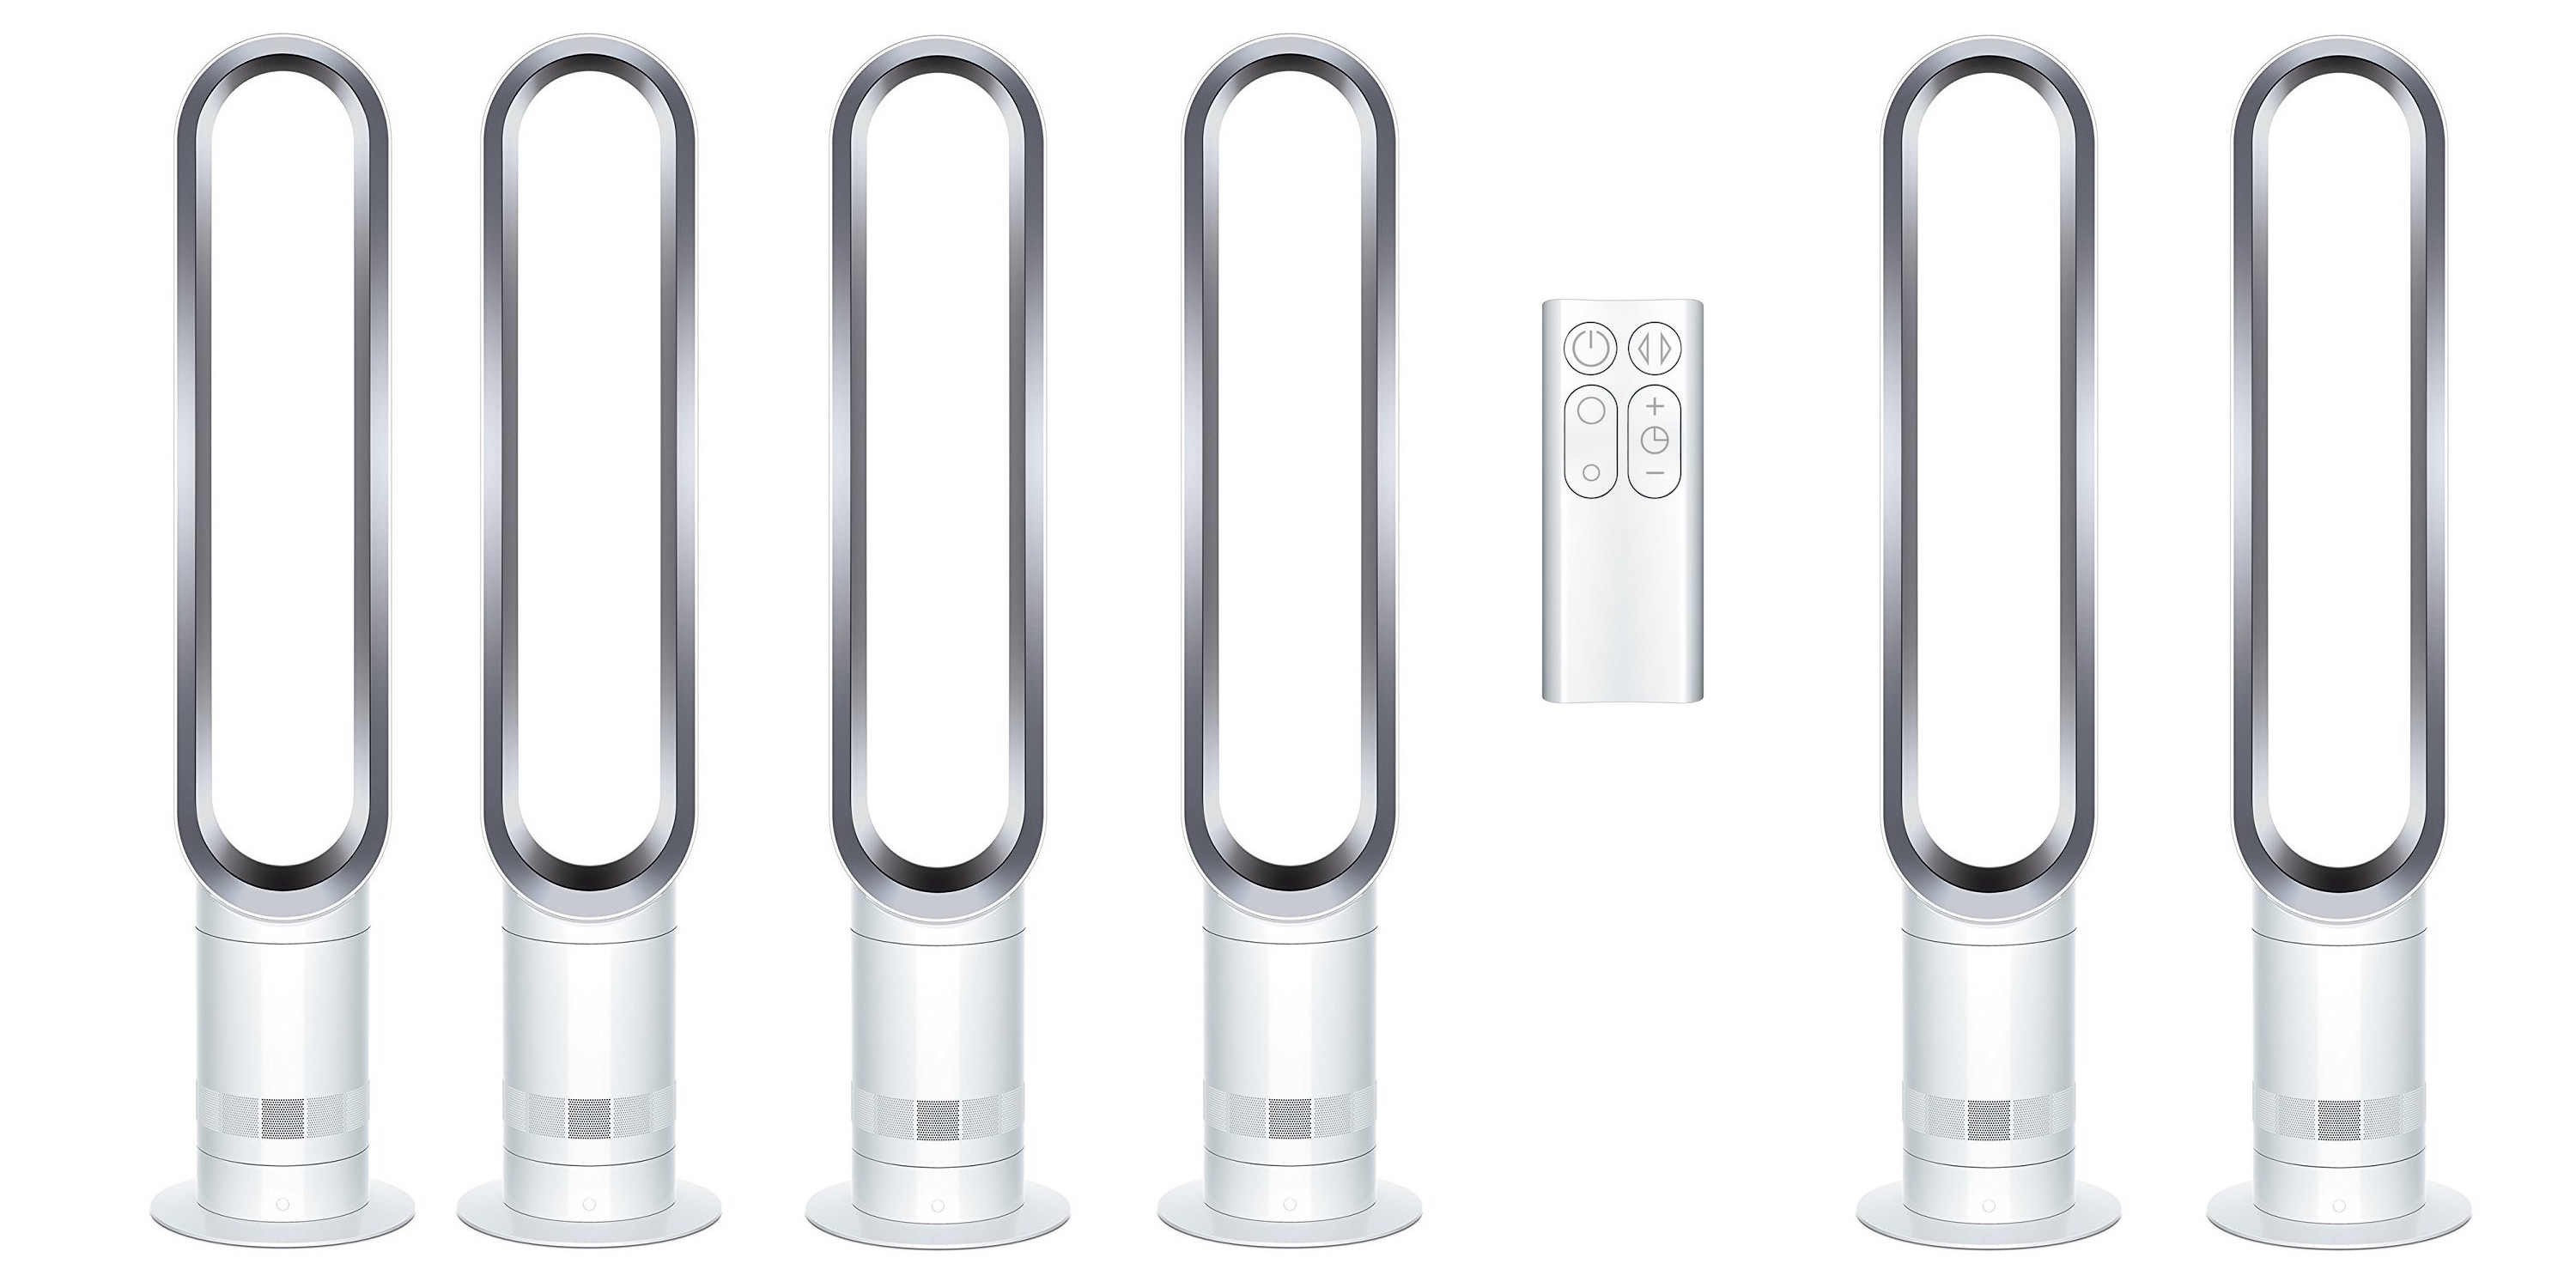 You grab a Dyson refurbished AM07 Tower Fan for more than $200 off today + more from shipped